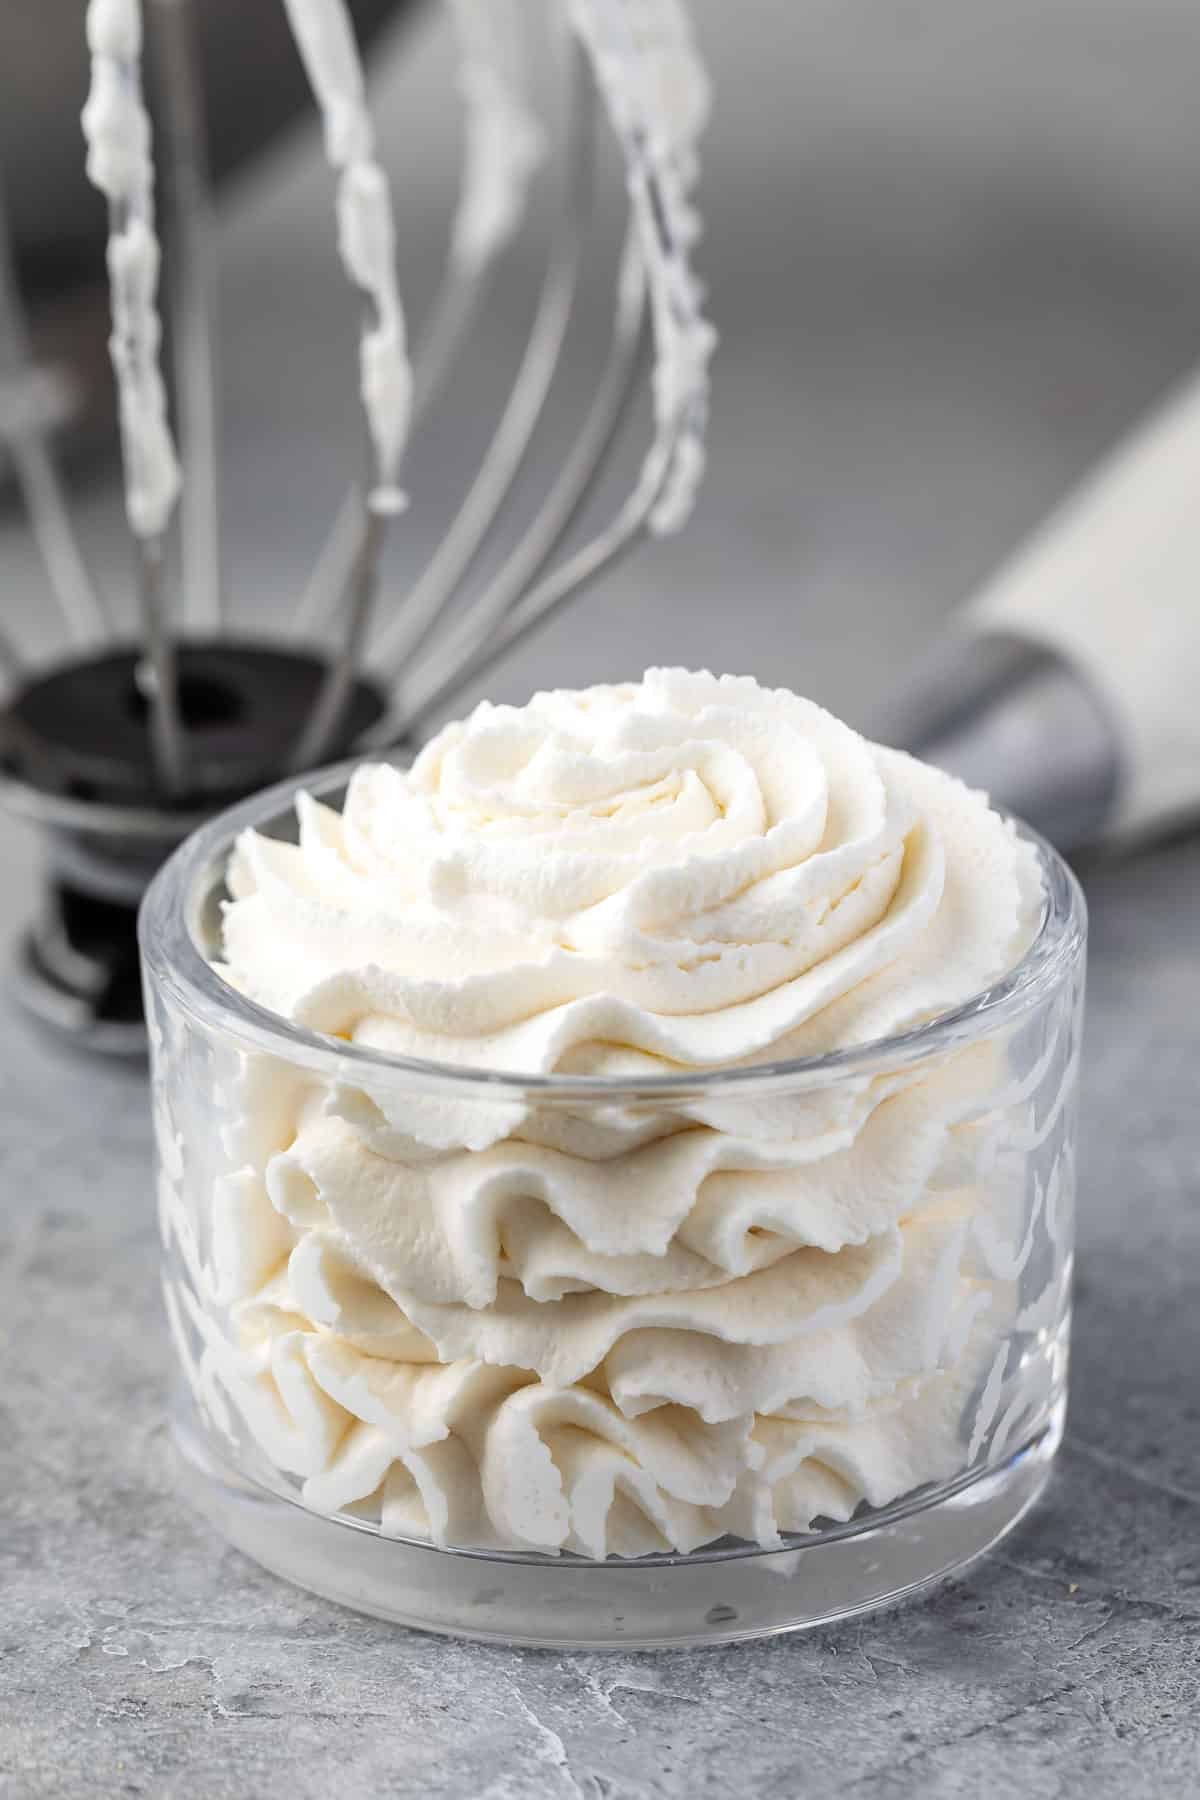 whipped cream in glass bowl with whisk attachment and pastry bag behind.